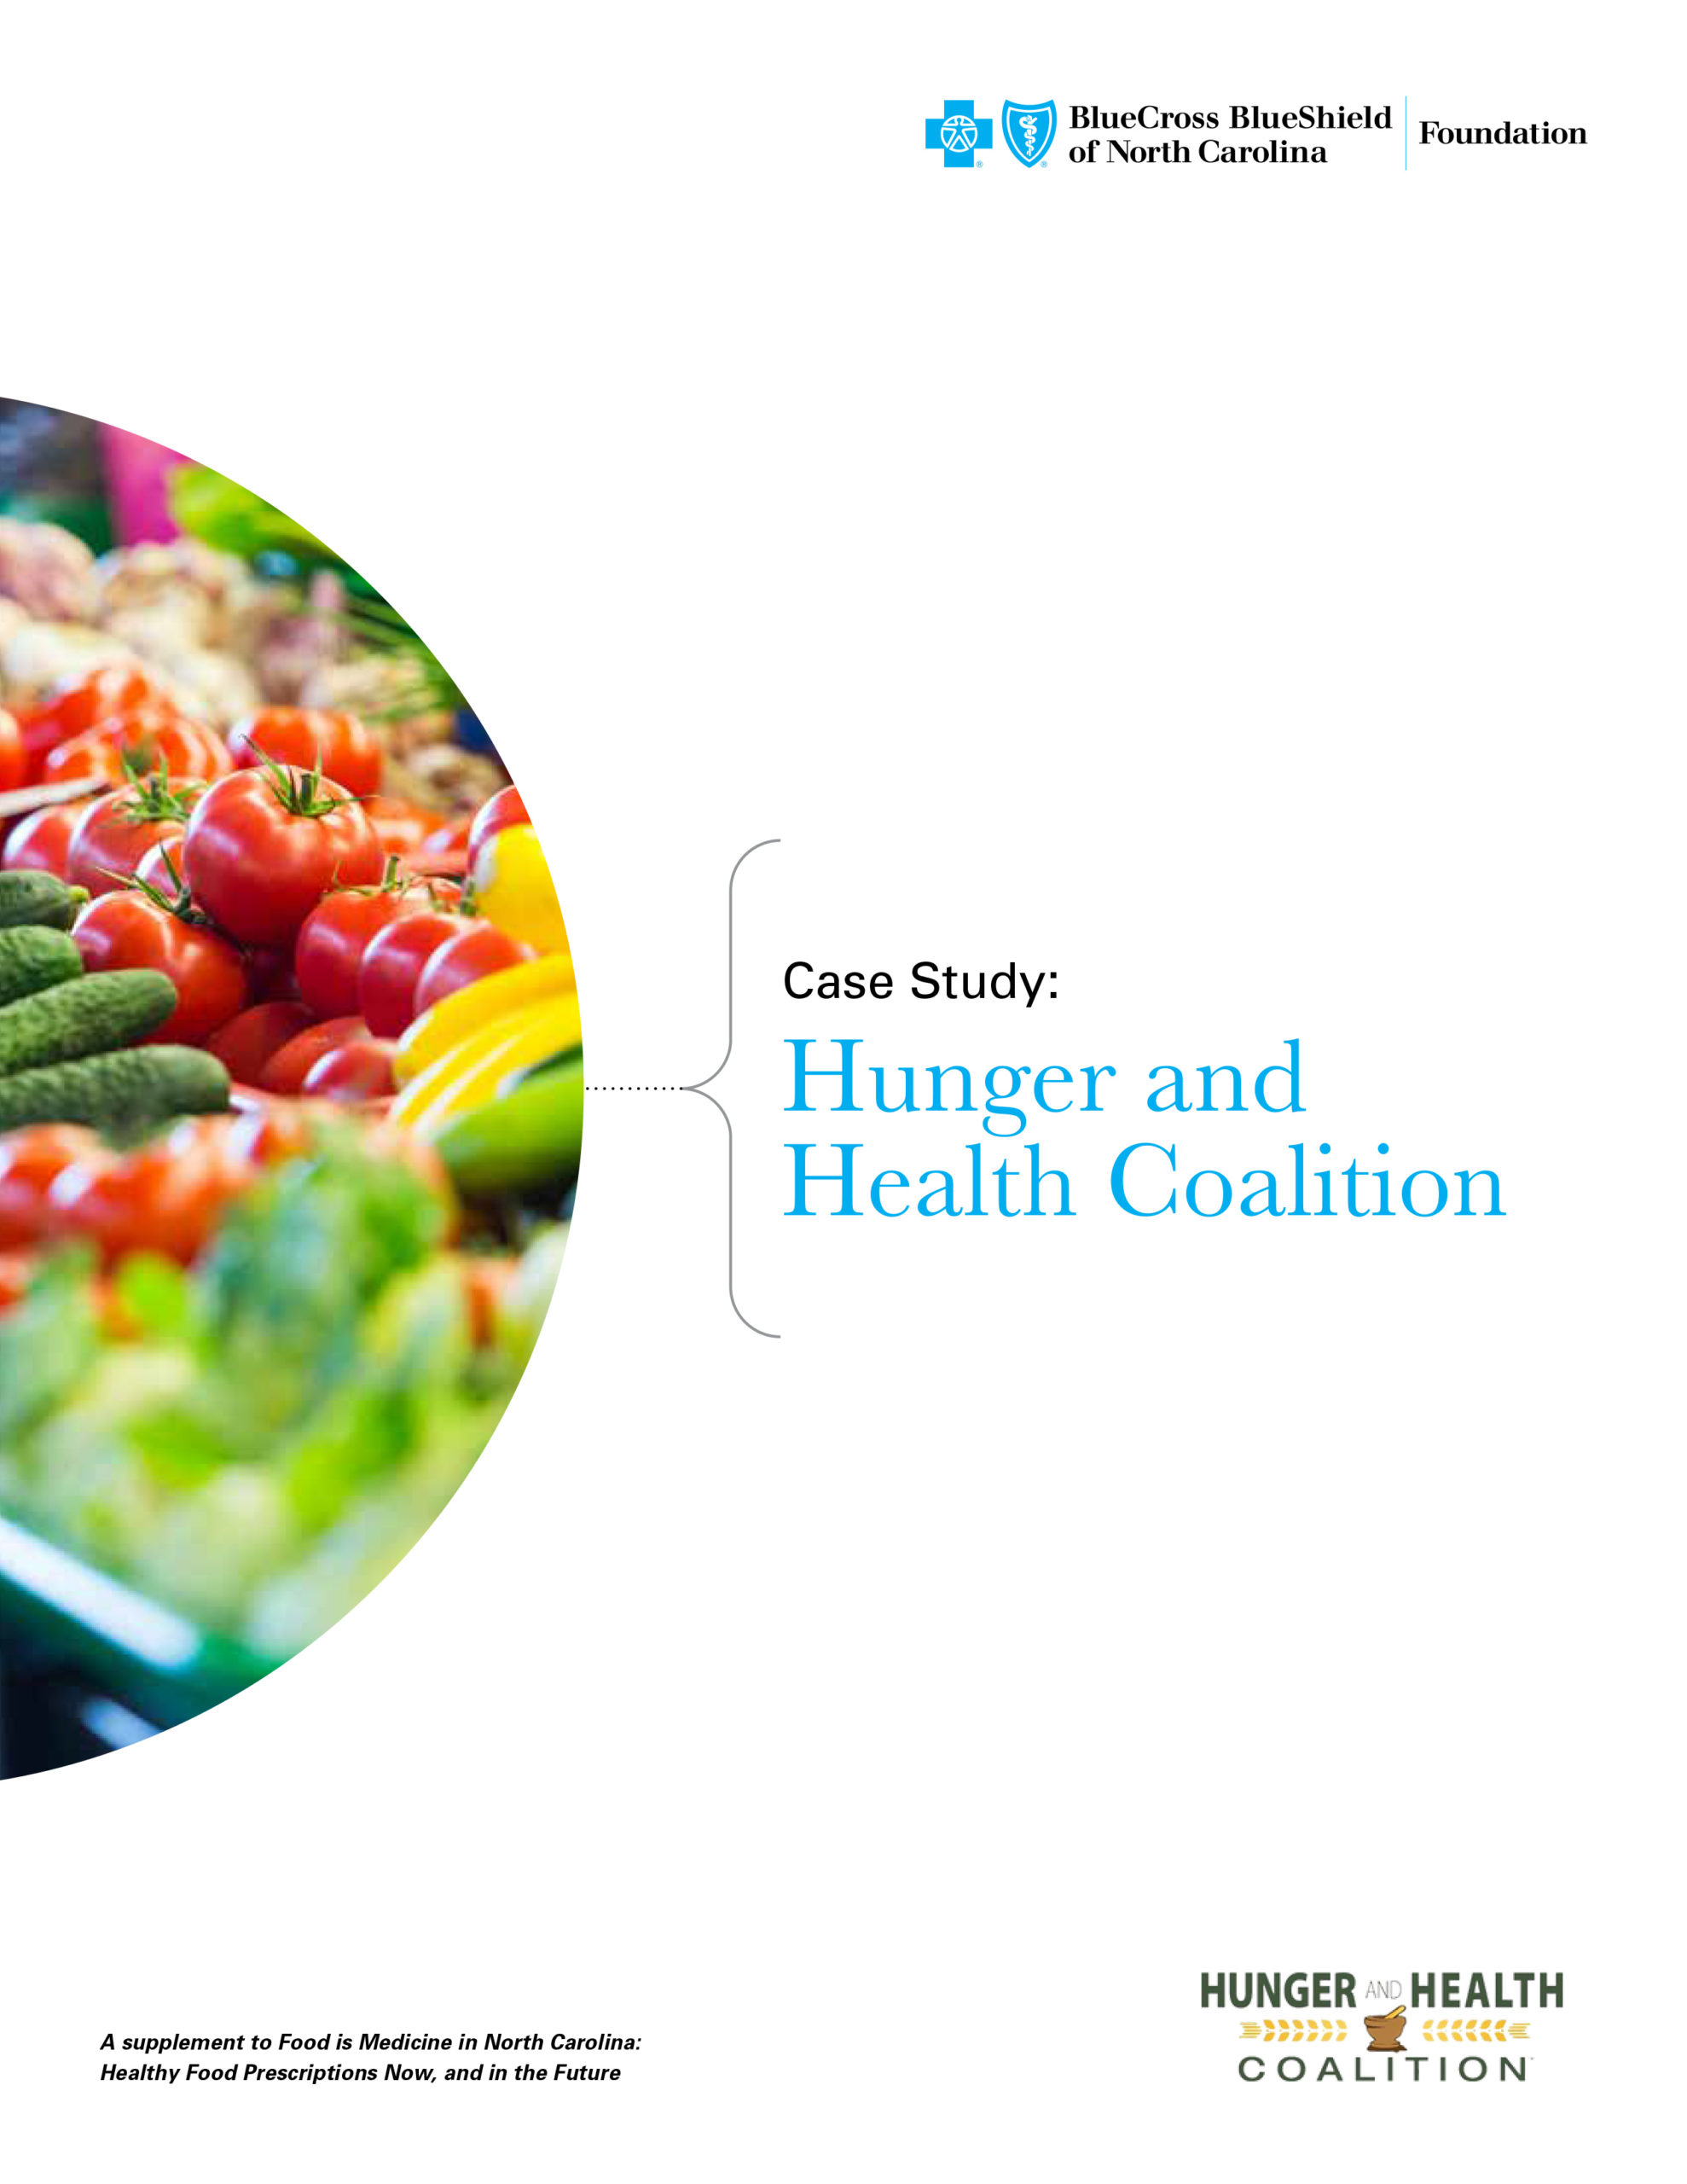 Hunger and Health Case Study Cover